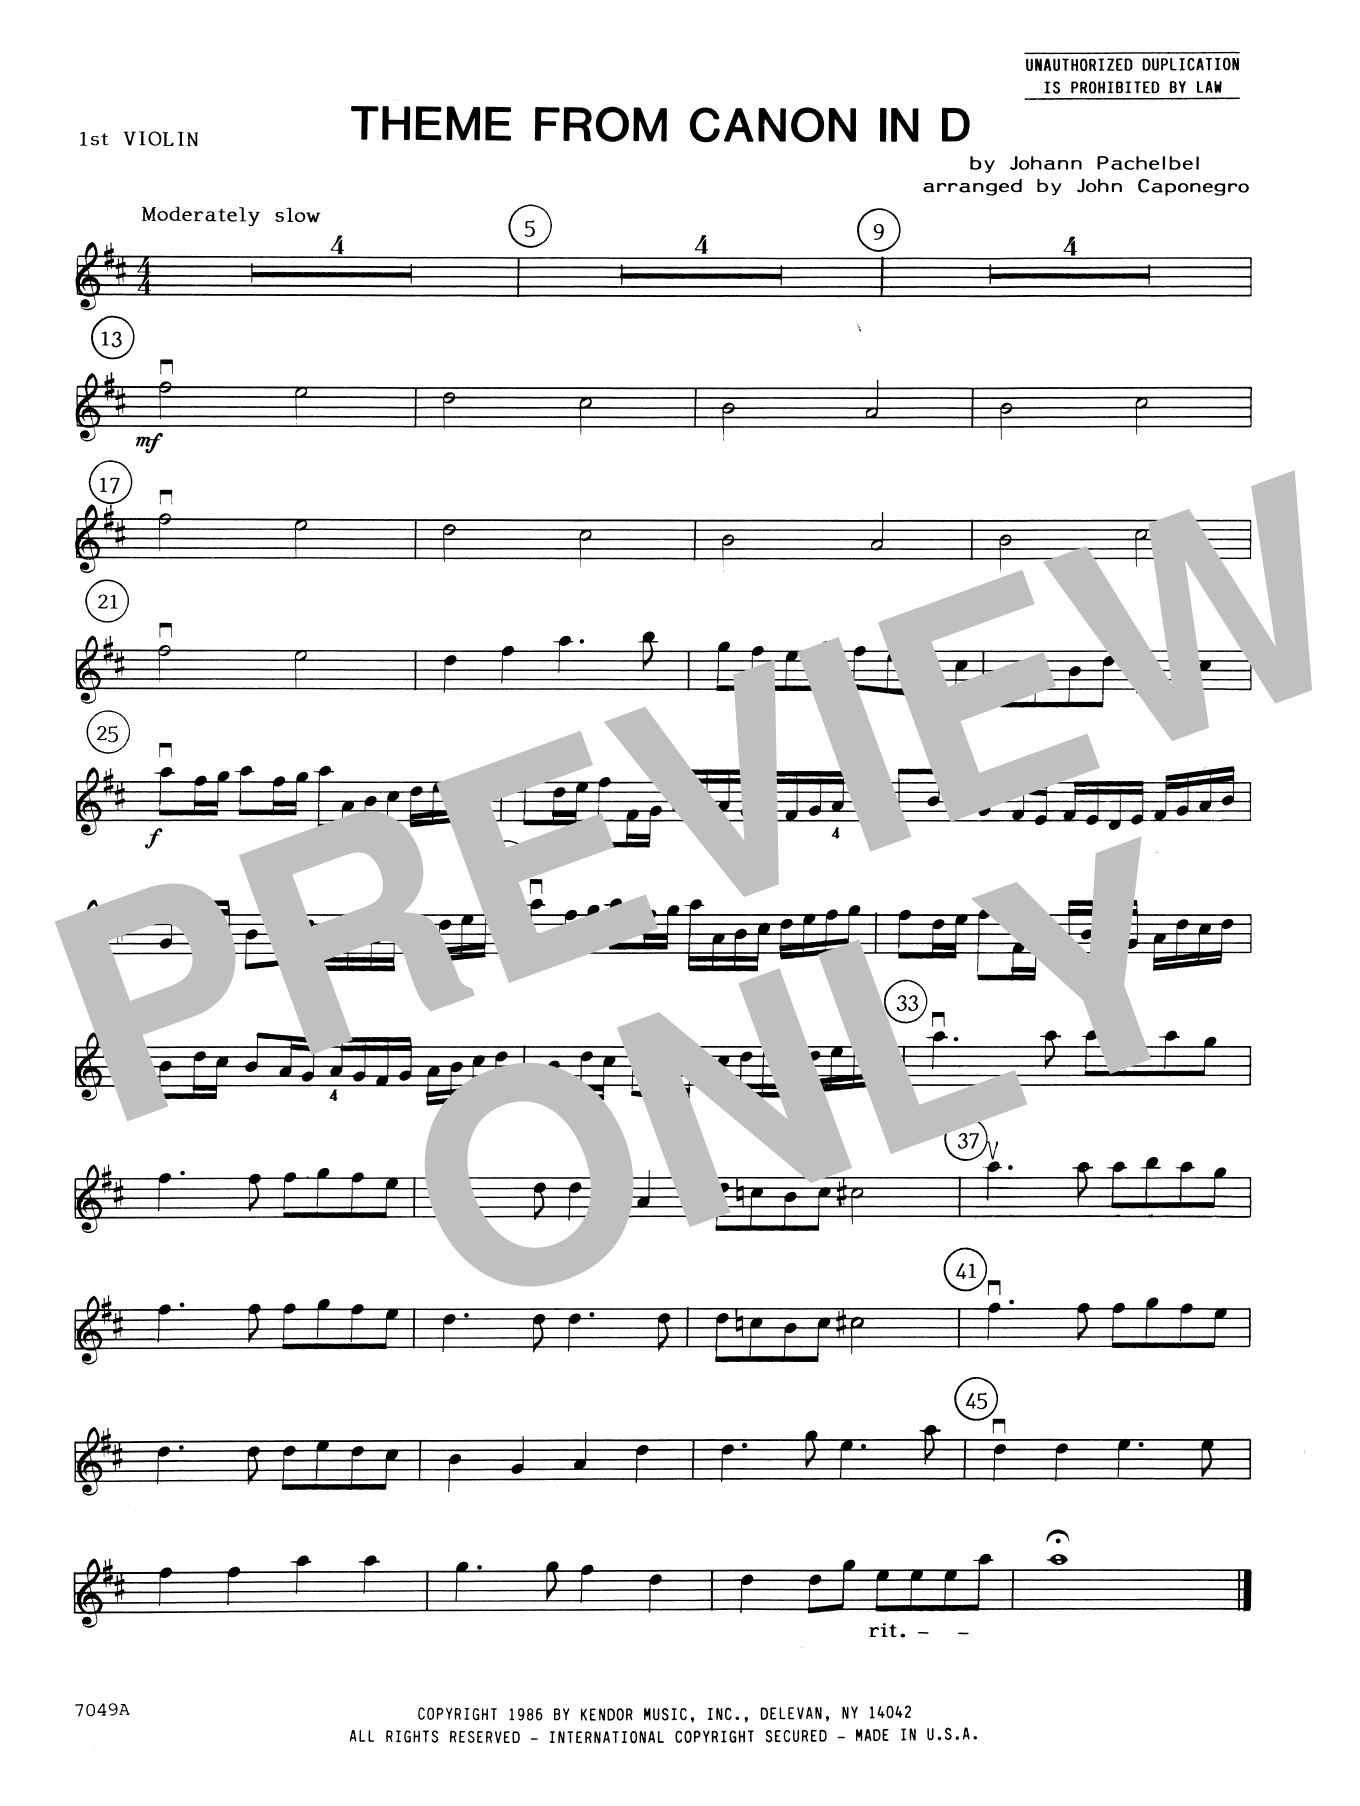 Download John Caponegro Theme From Canon In D - 1st Violin Sheet Music